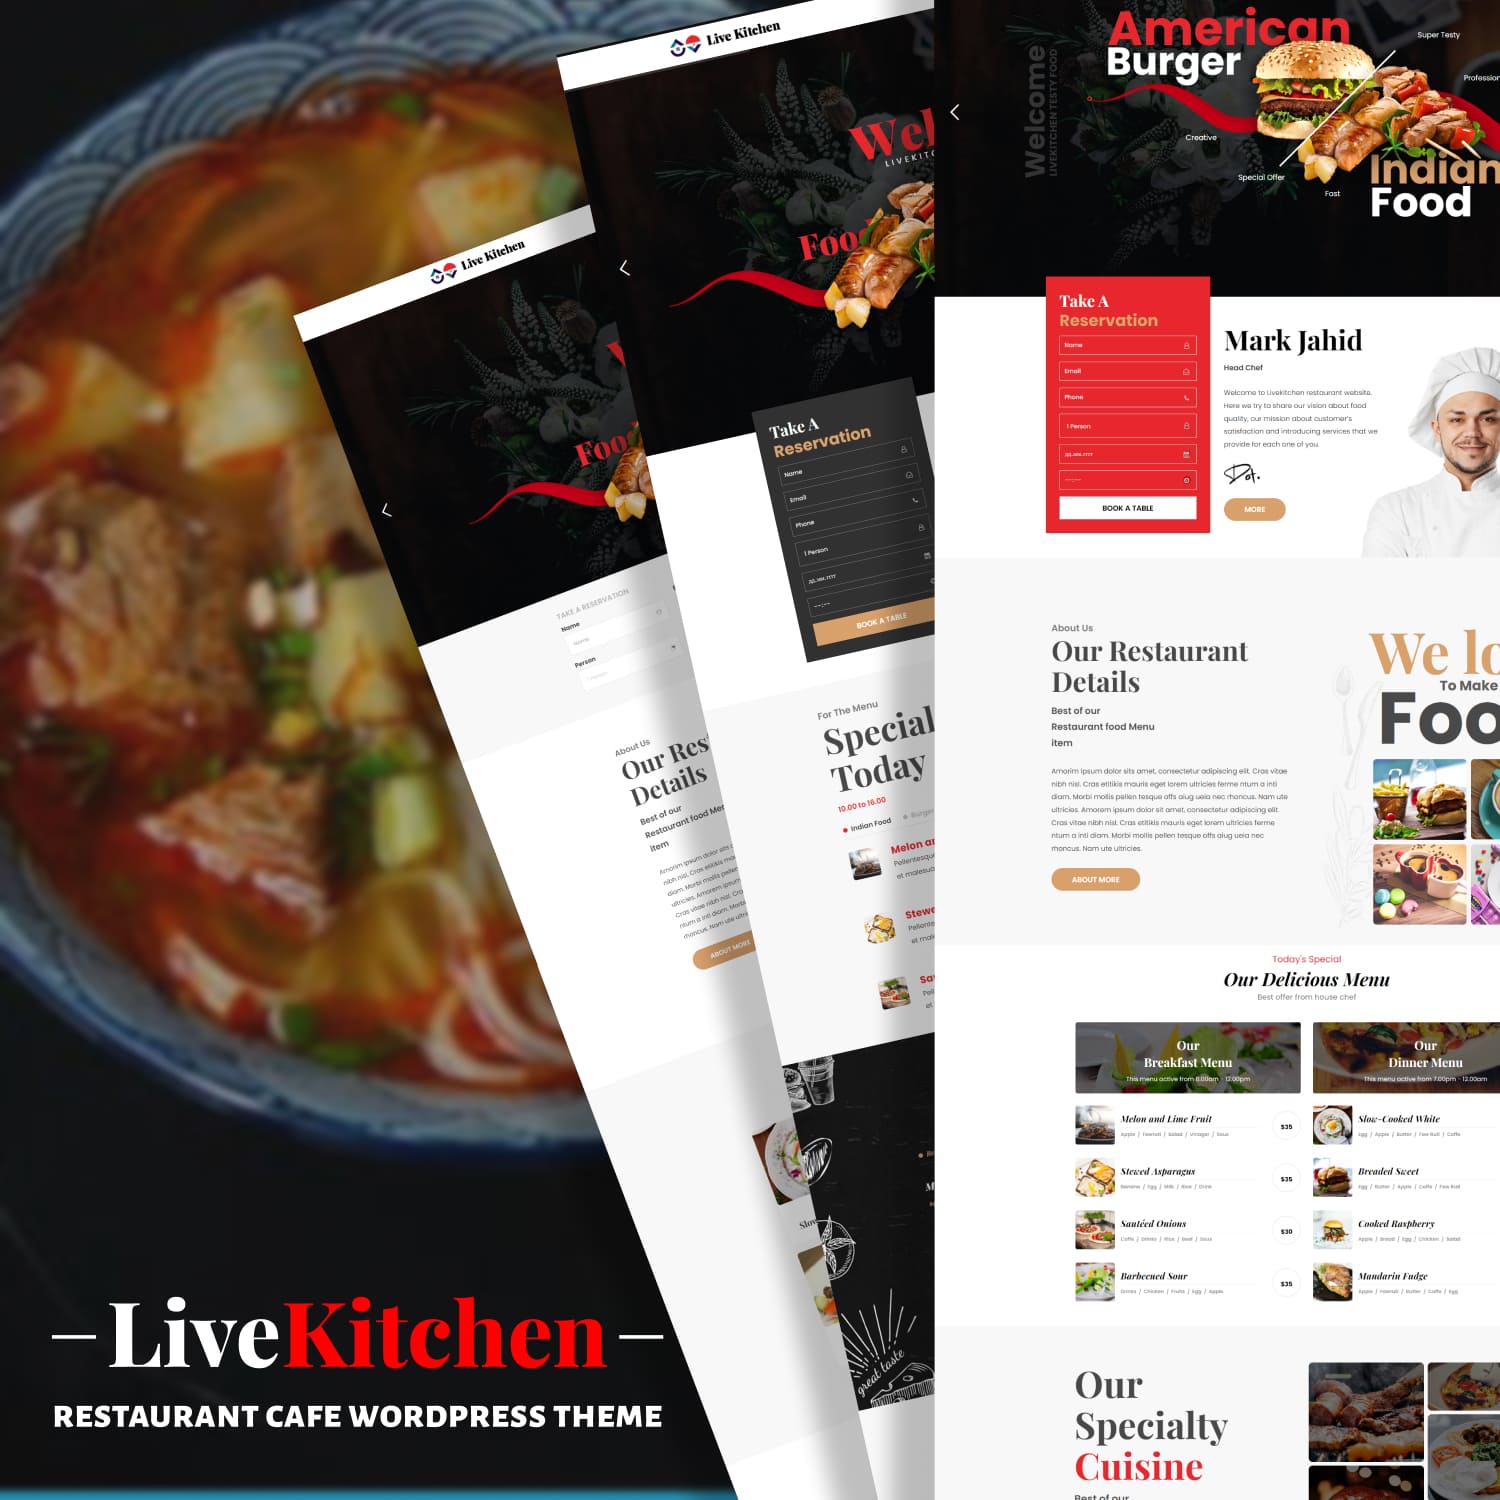 American burger and Indian food of the Livekitchen | Restaurant Cafe WordPress Theme.